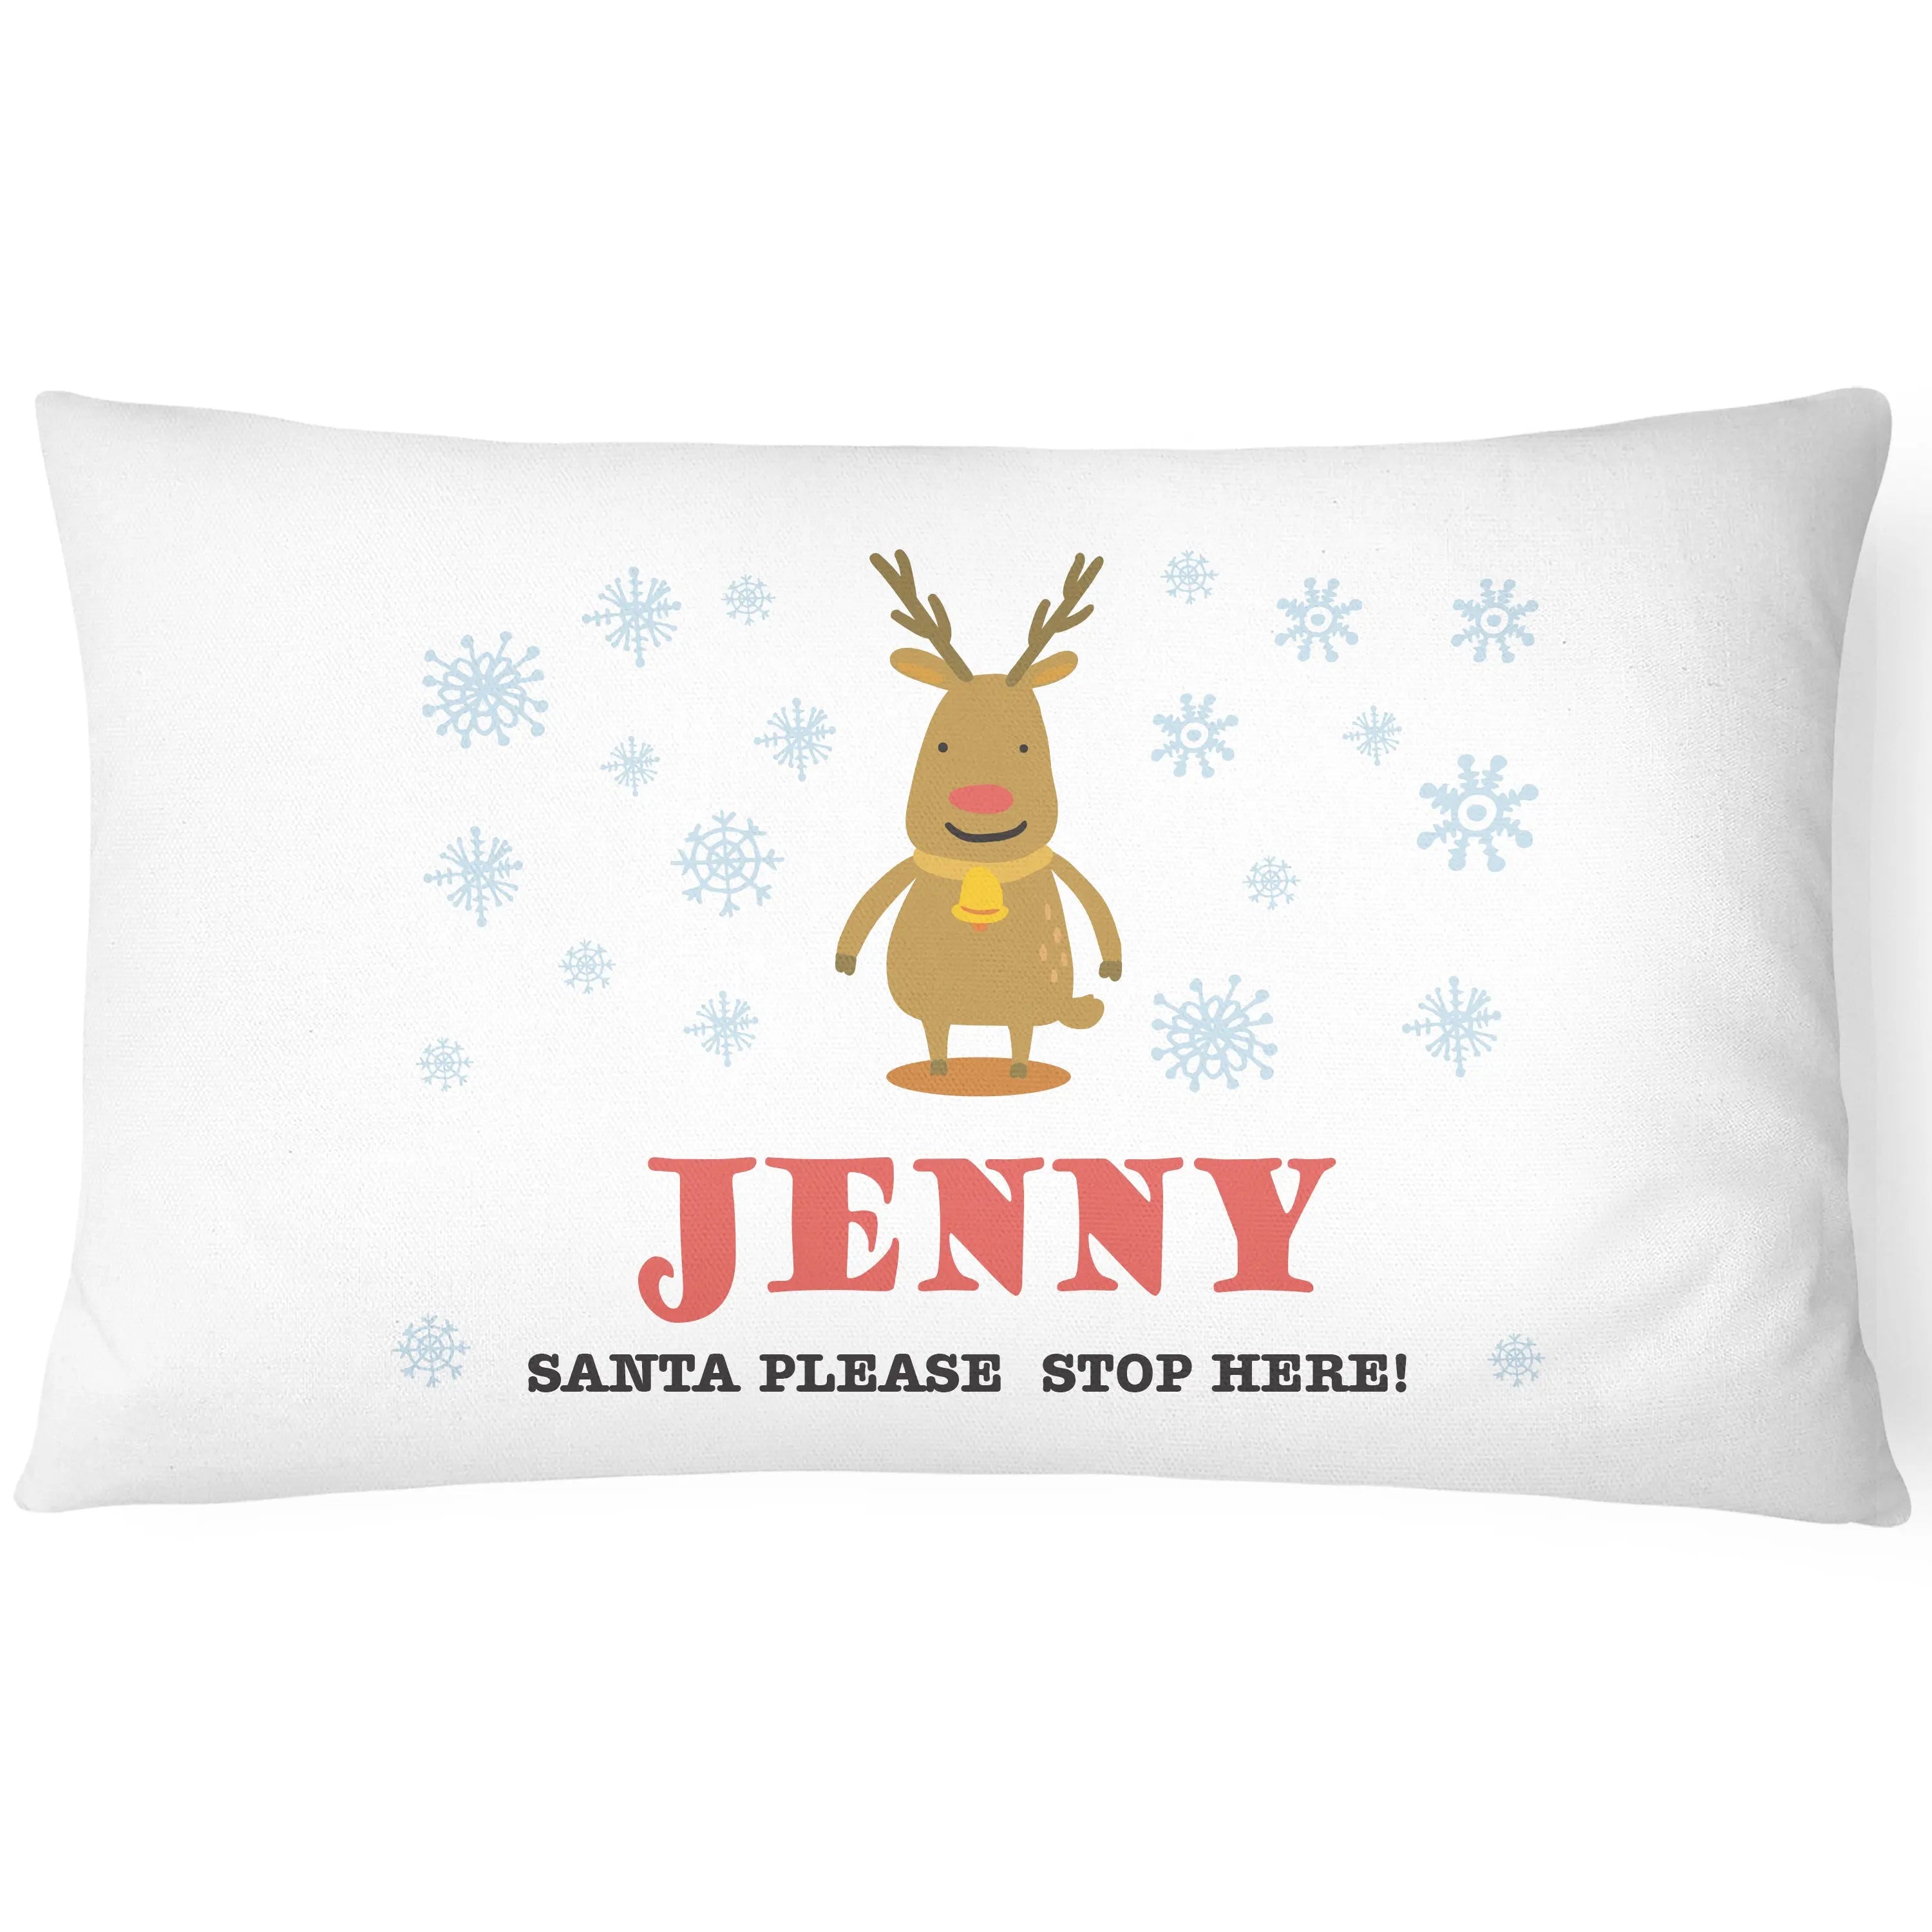 Christmas Pillowcase for Kids - Personalise With Any Name - Perfect Children's Gift - Reindeer